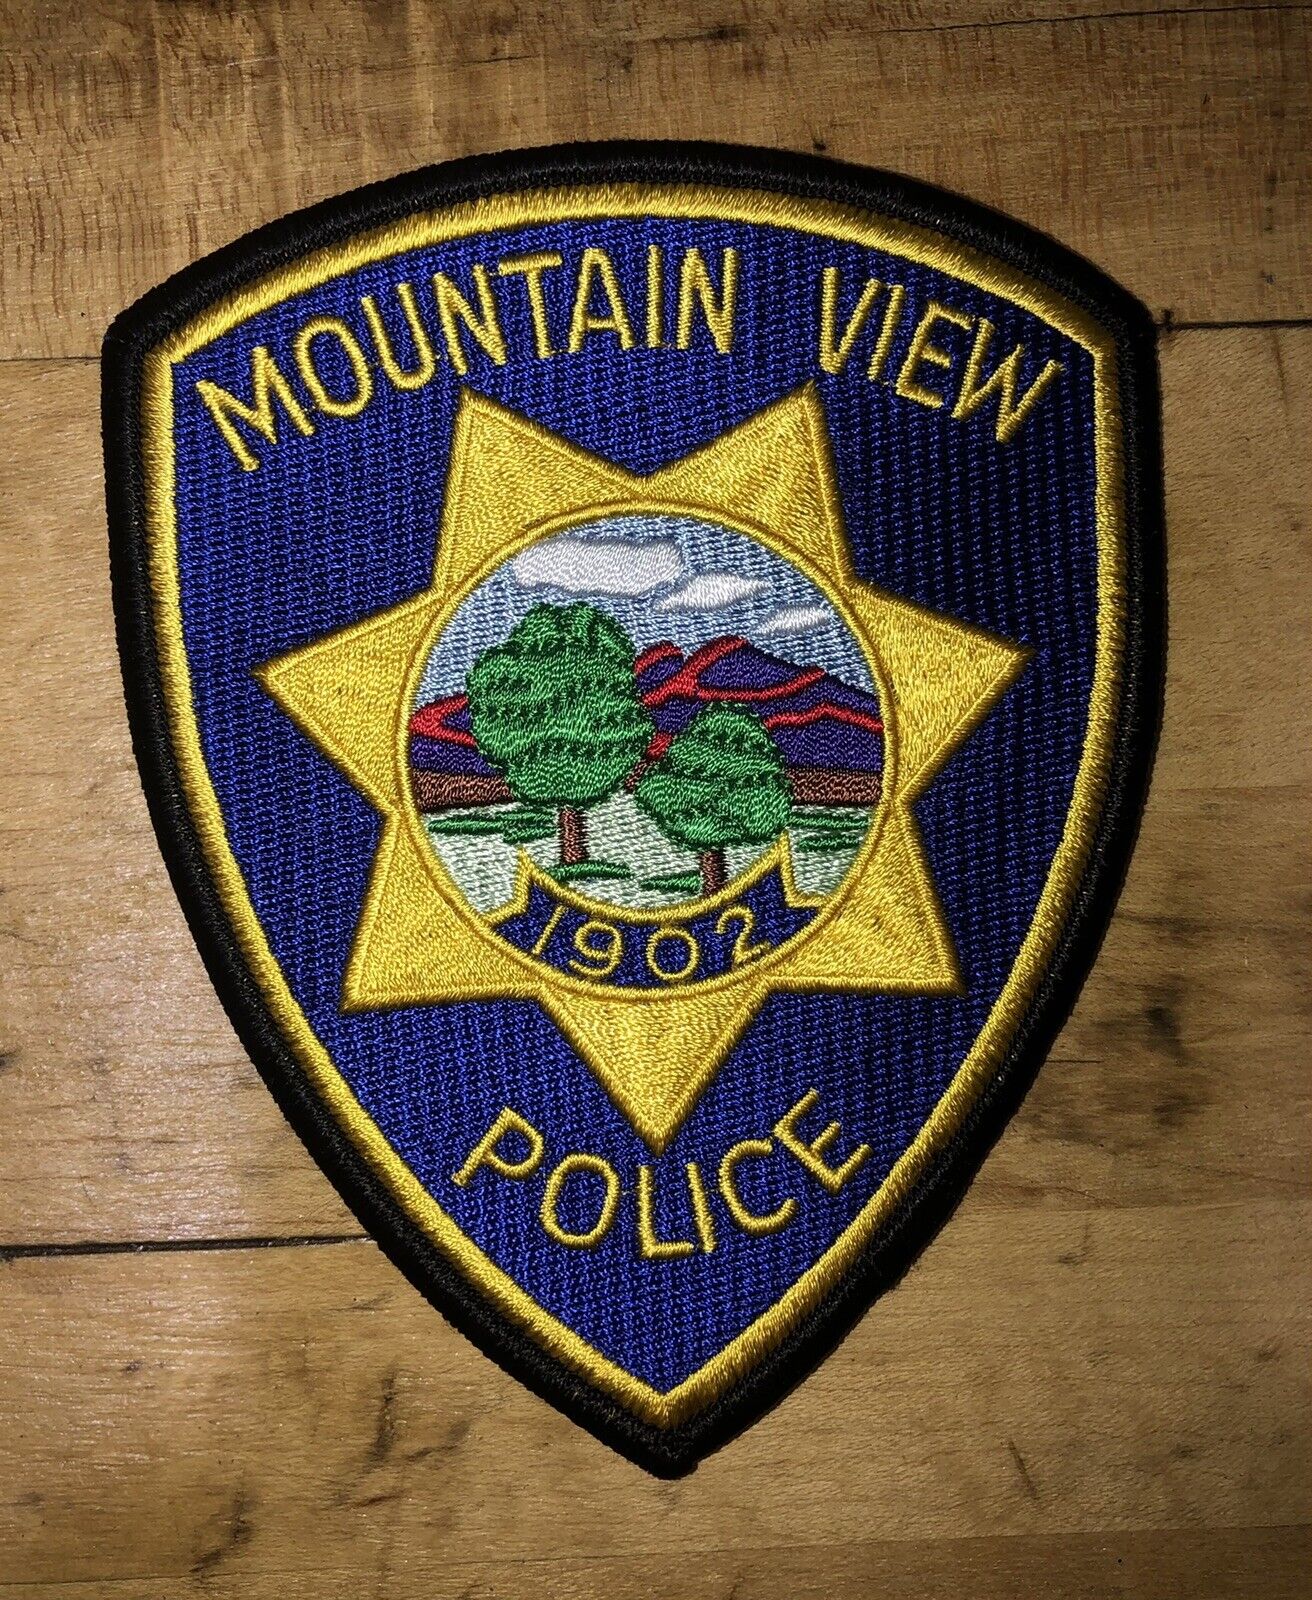 Mountain View California Police Department Patch